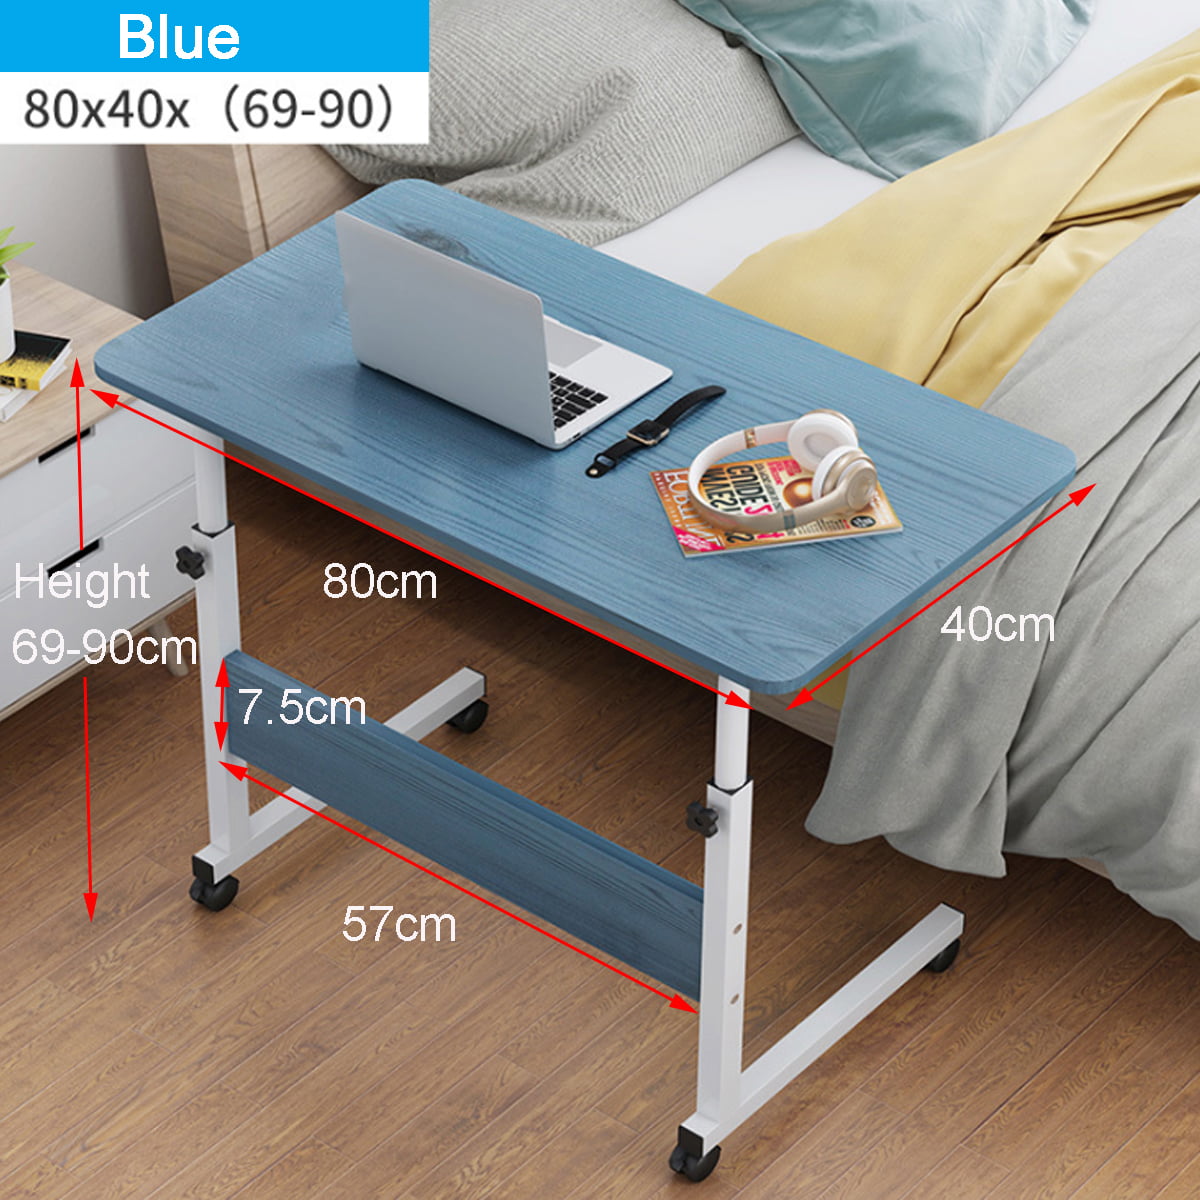 White Maple, 31.5in15.8in NOVII Overbed Side Table Adjustable Mobile Wheel Bed Table Portable Laptop Computer Stand Desks Cart Tray 